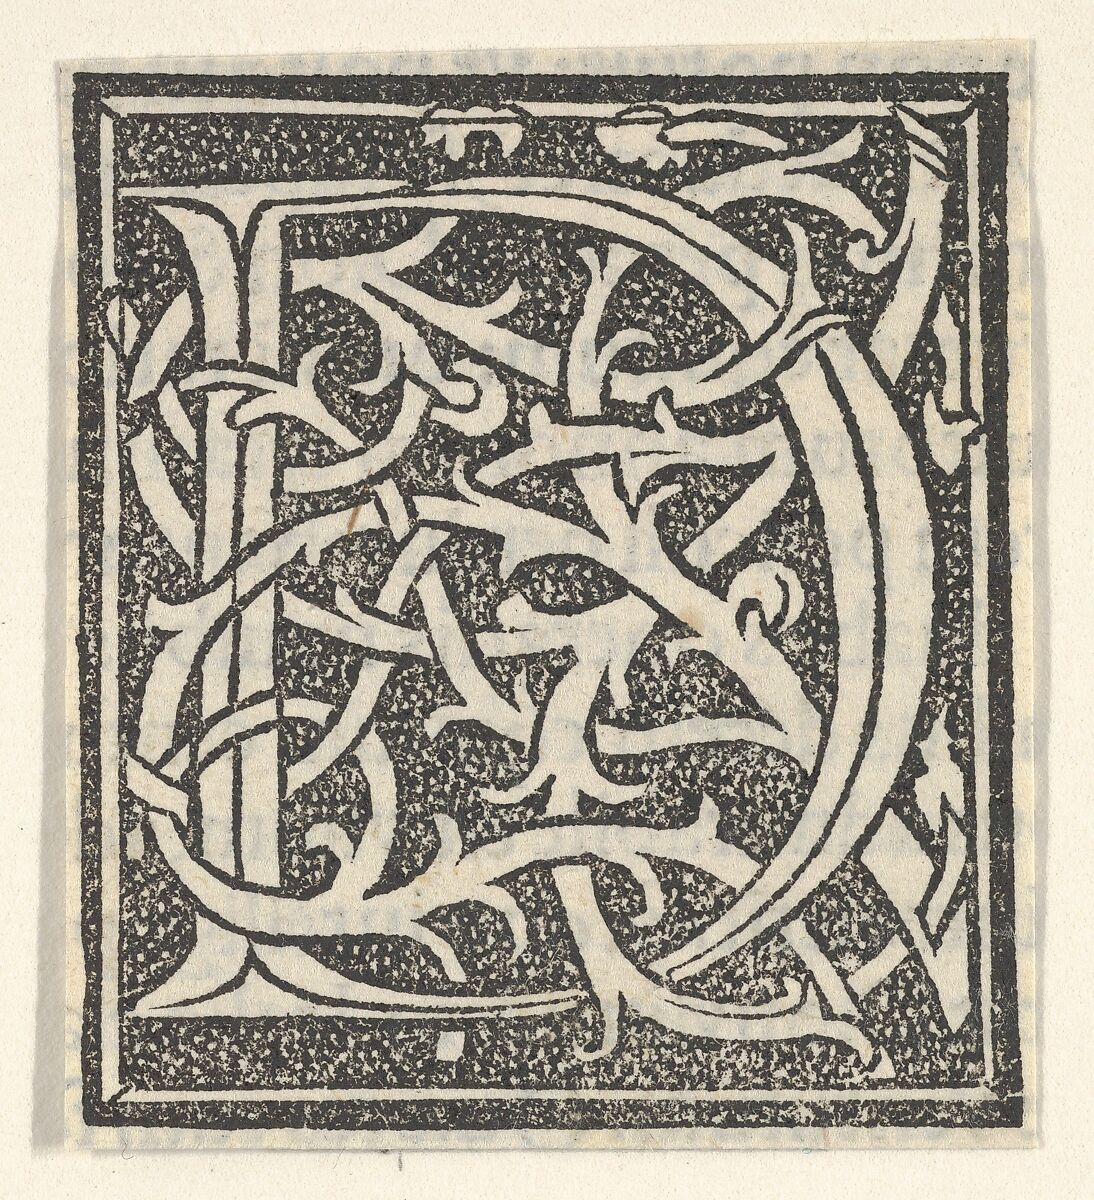 Initial letter D on patterned background, Anonymous, Italian, 16th century, Woodcut, criblé ground 